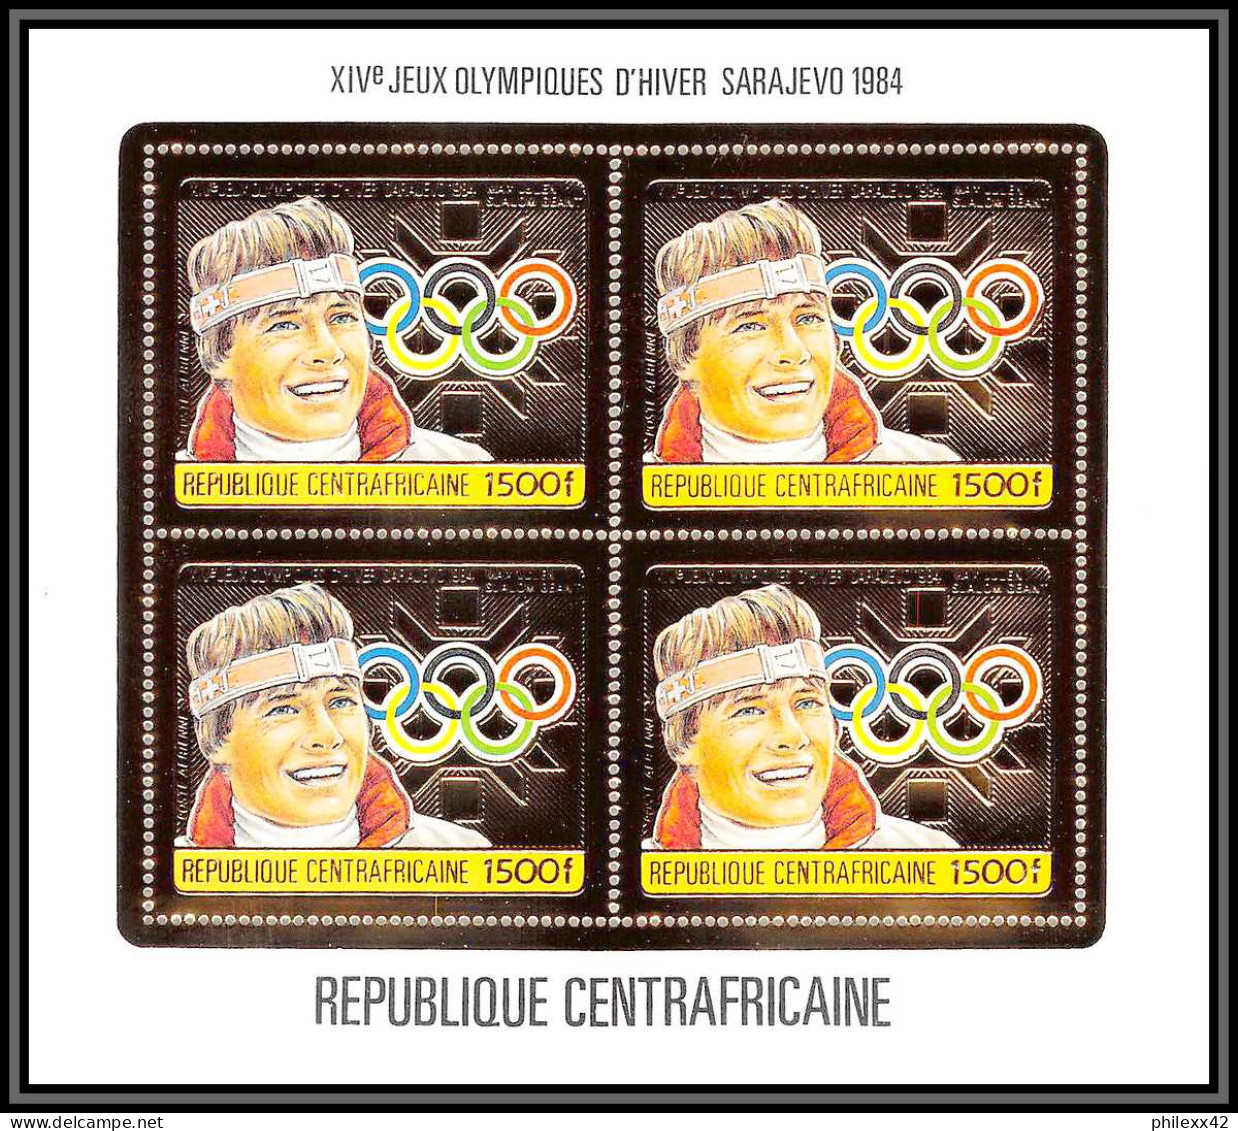 86054/ N°1069 A Max Julen Suisse Sarajevo Jeux Olympiques Olympic Games 1984 Centrafricaine OR Gold MNH Bloc 4 Discount - Winter 1984: Sarajevo